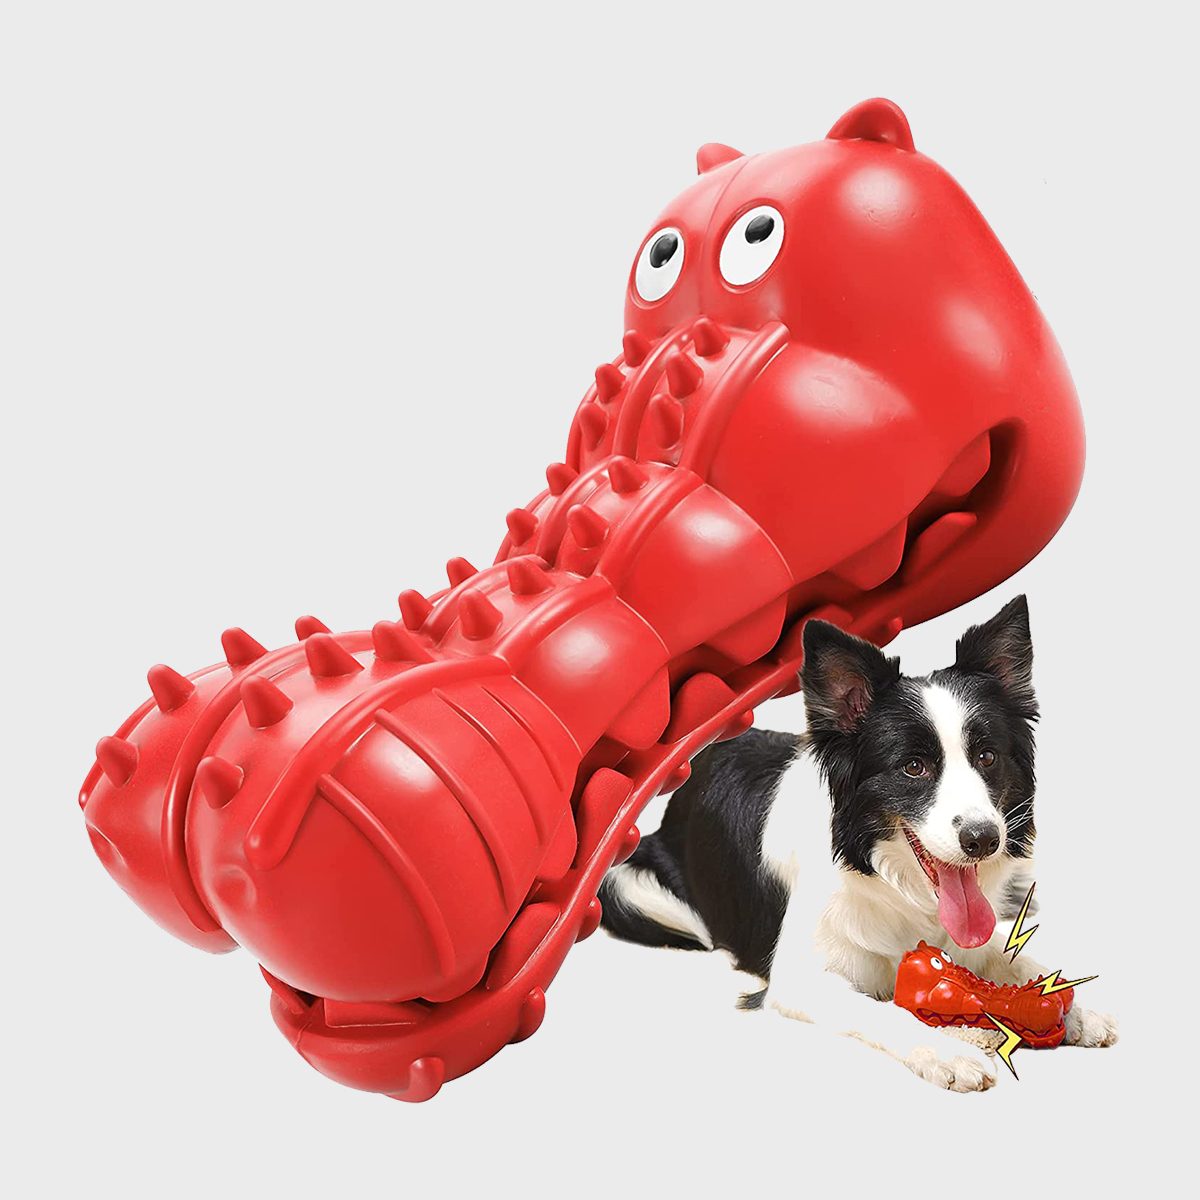 Durable And Safe Dog Toy For Small Breeds Long lasting - Temu